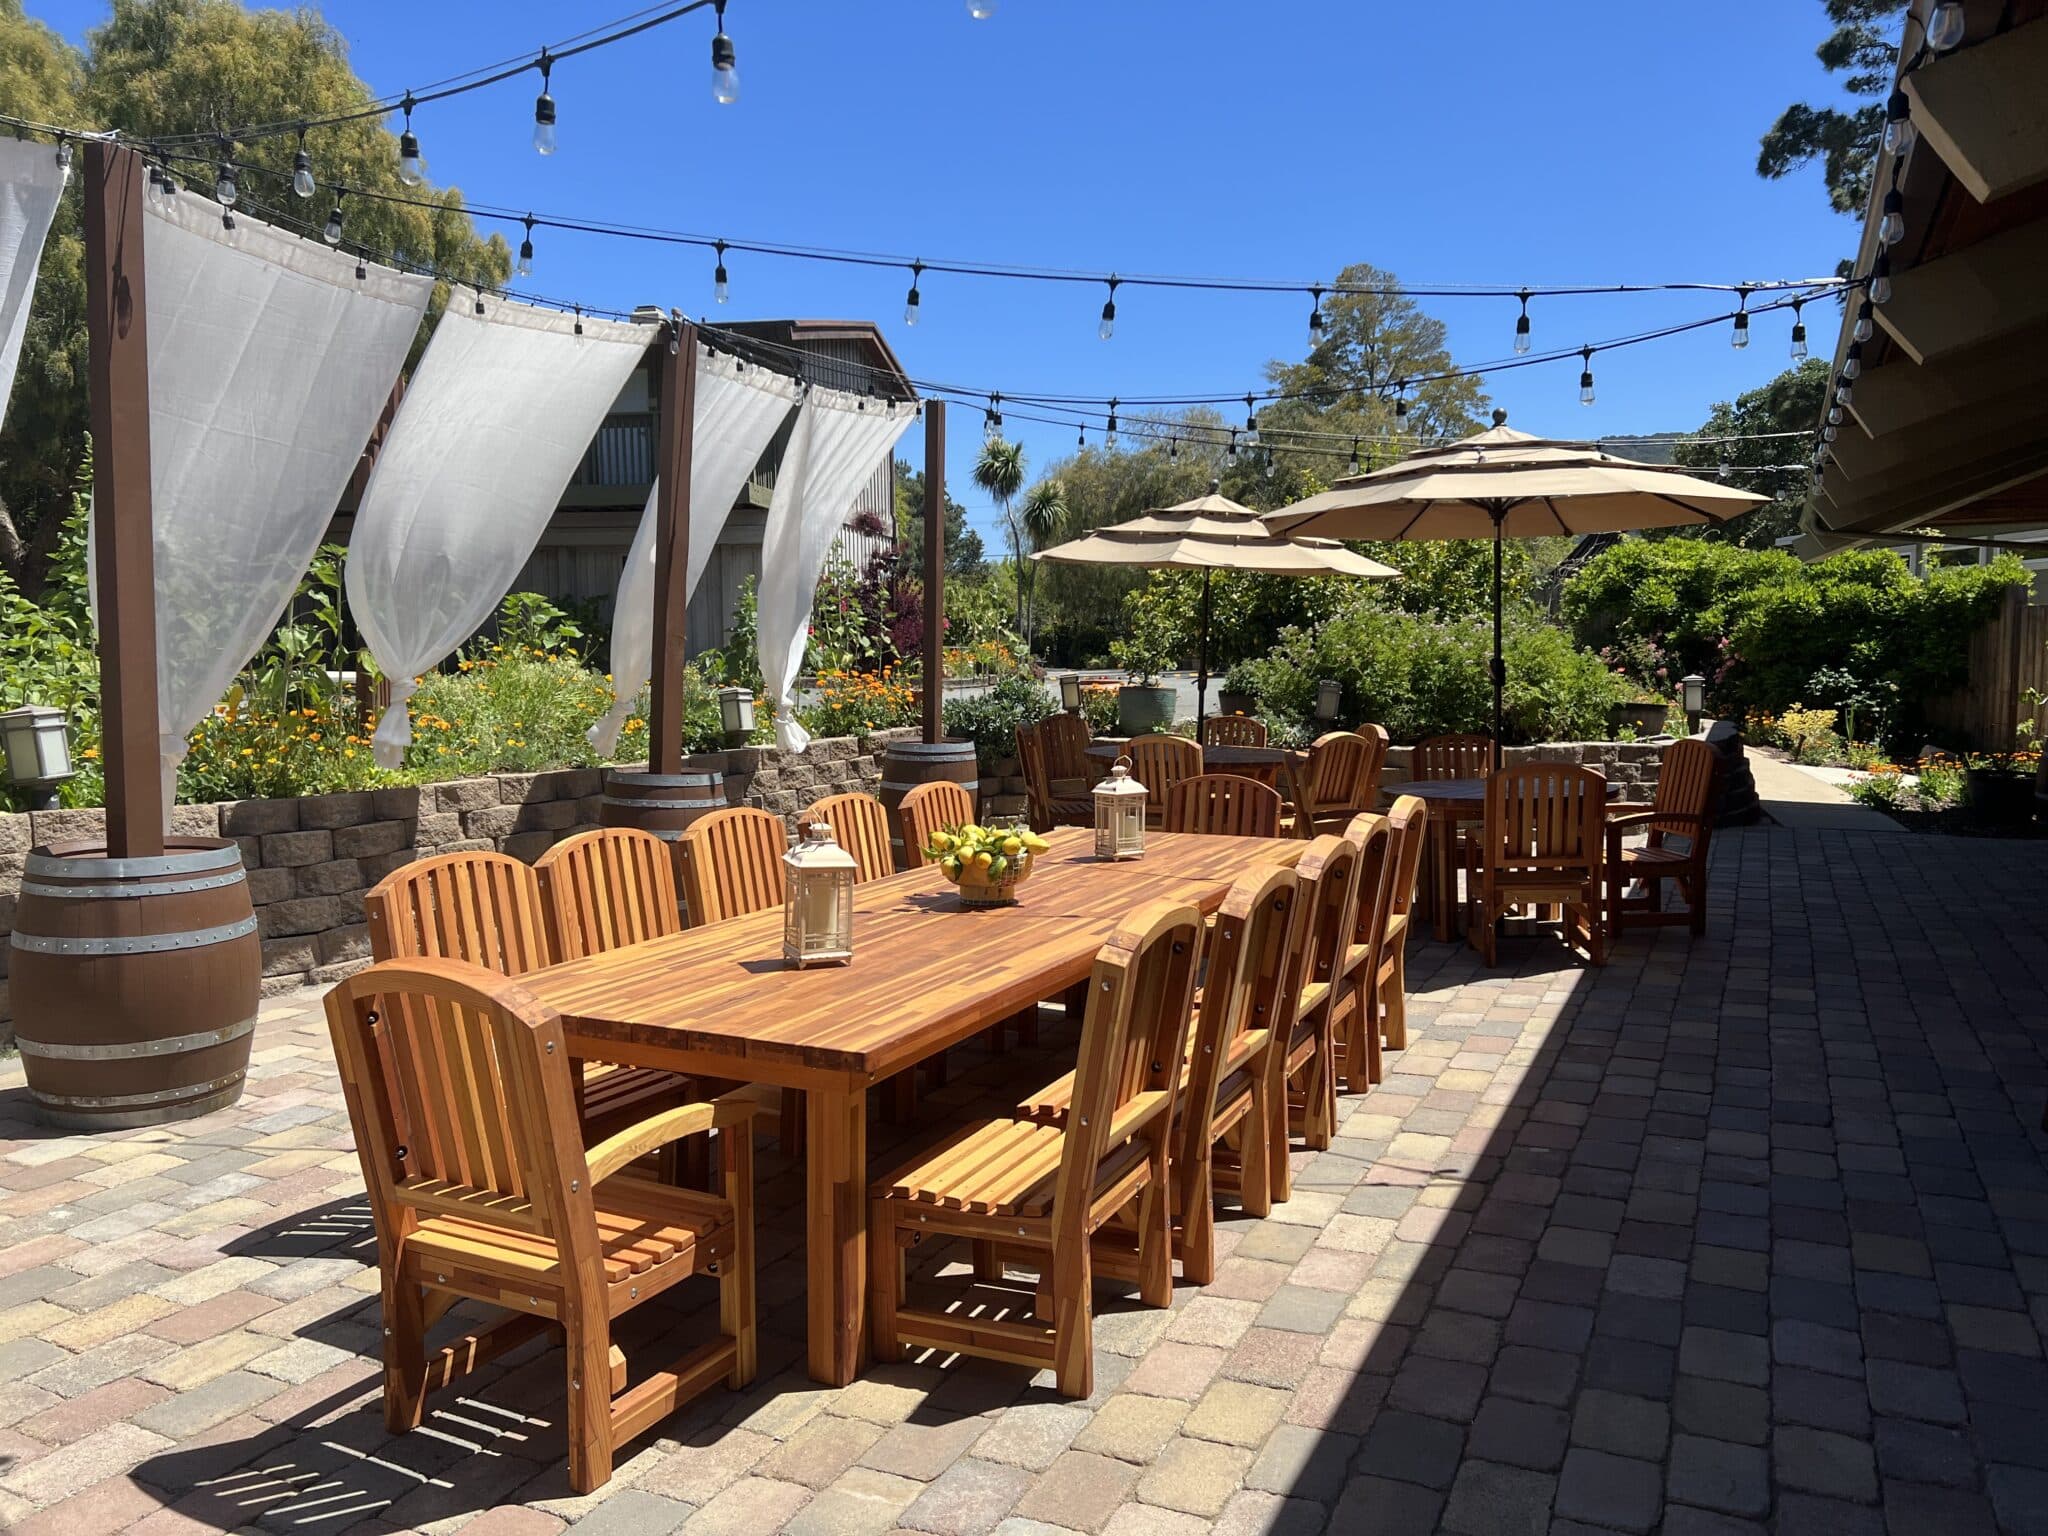 Outdoor dining at Carmel Valley Lodge